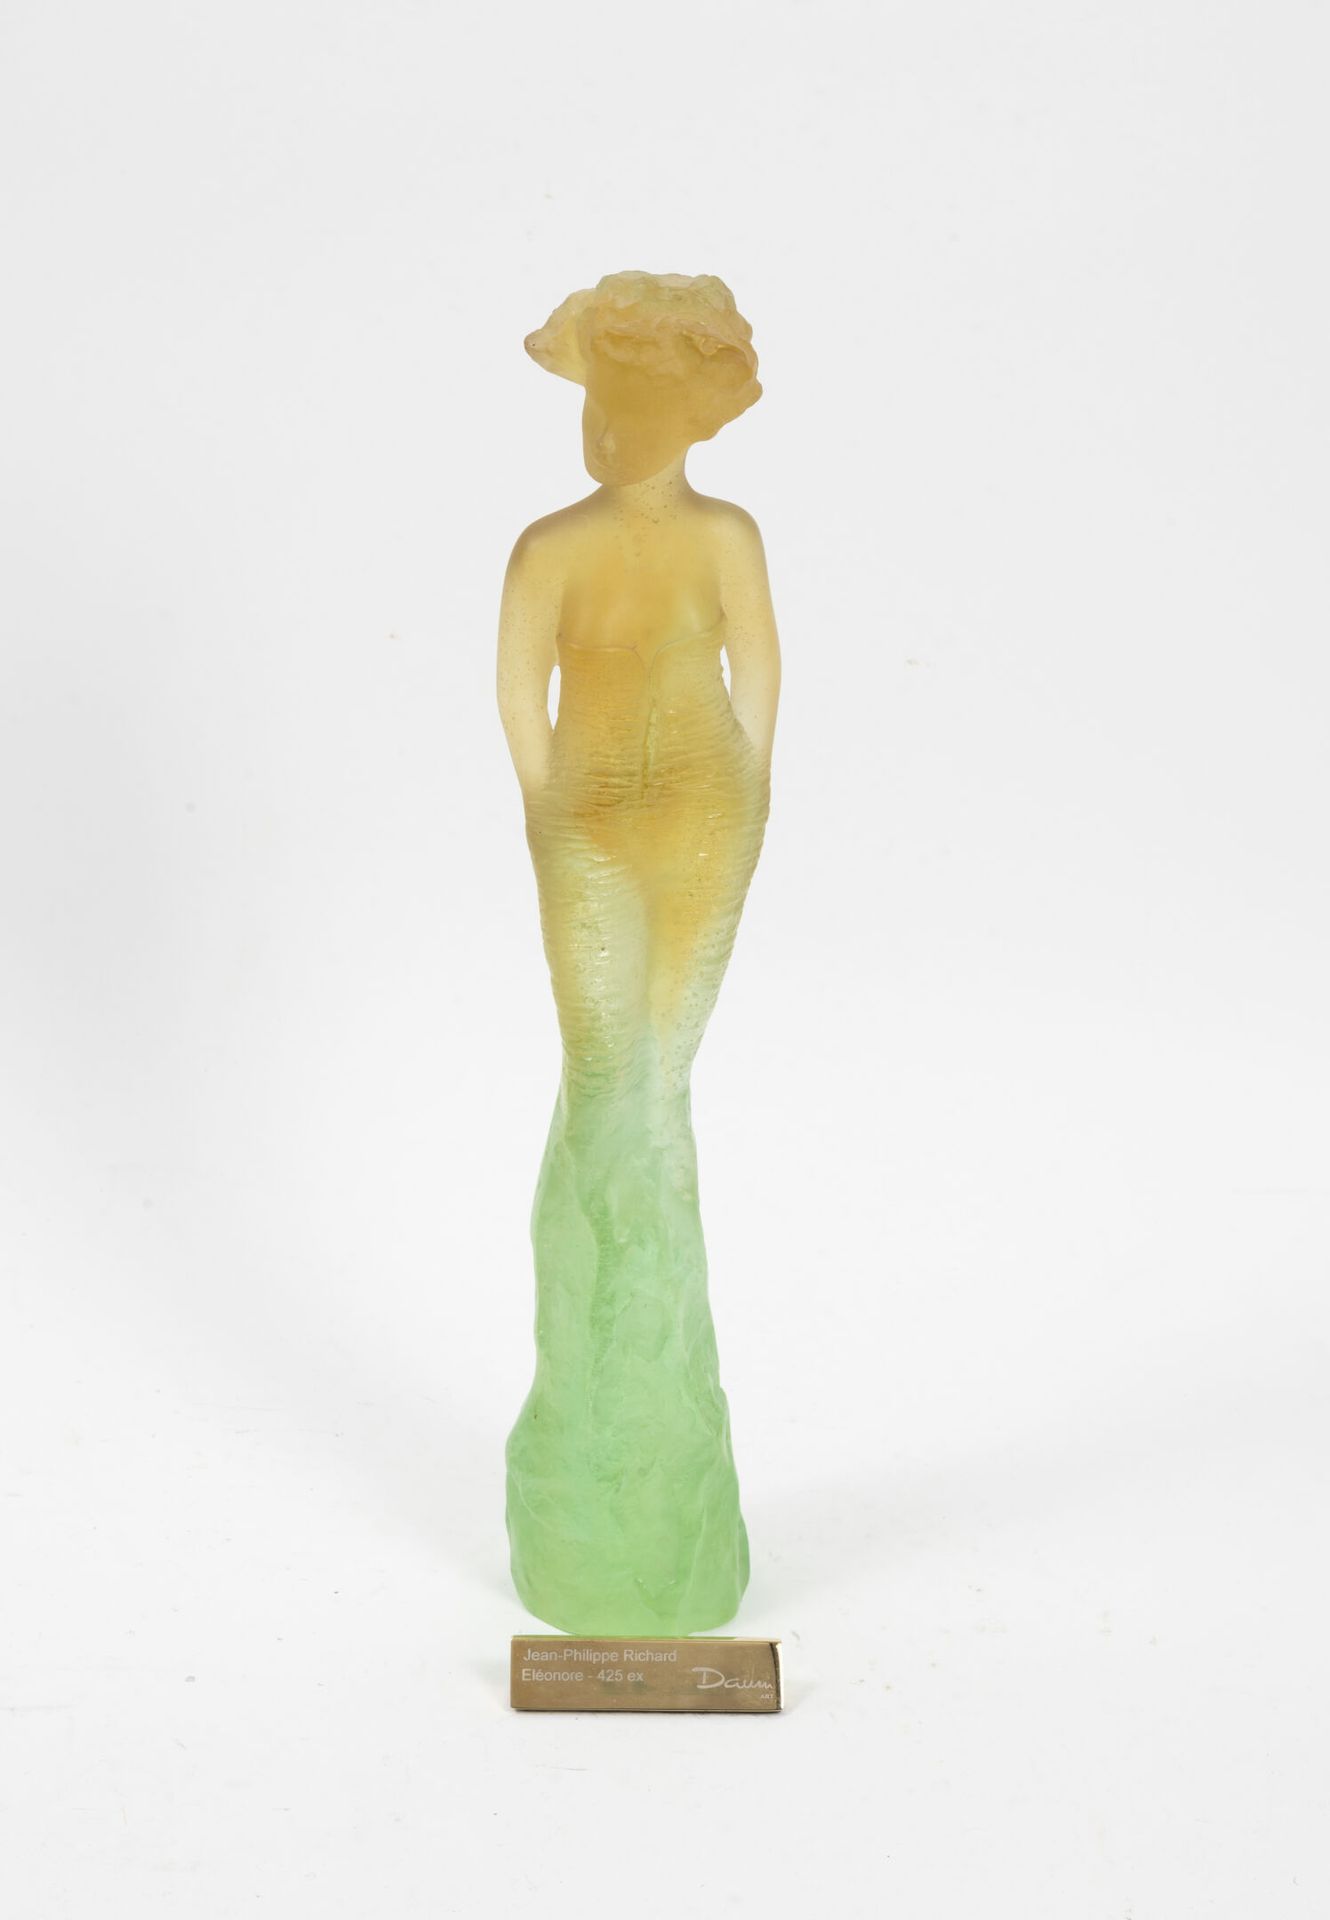 Jean Philippe RICHARD (1947) pour DAUM Eleonore.

Sculpture in yellow and green &hellip;